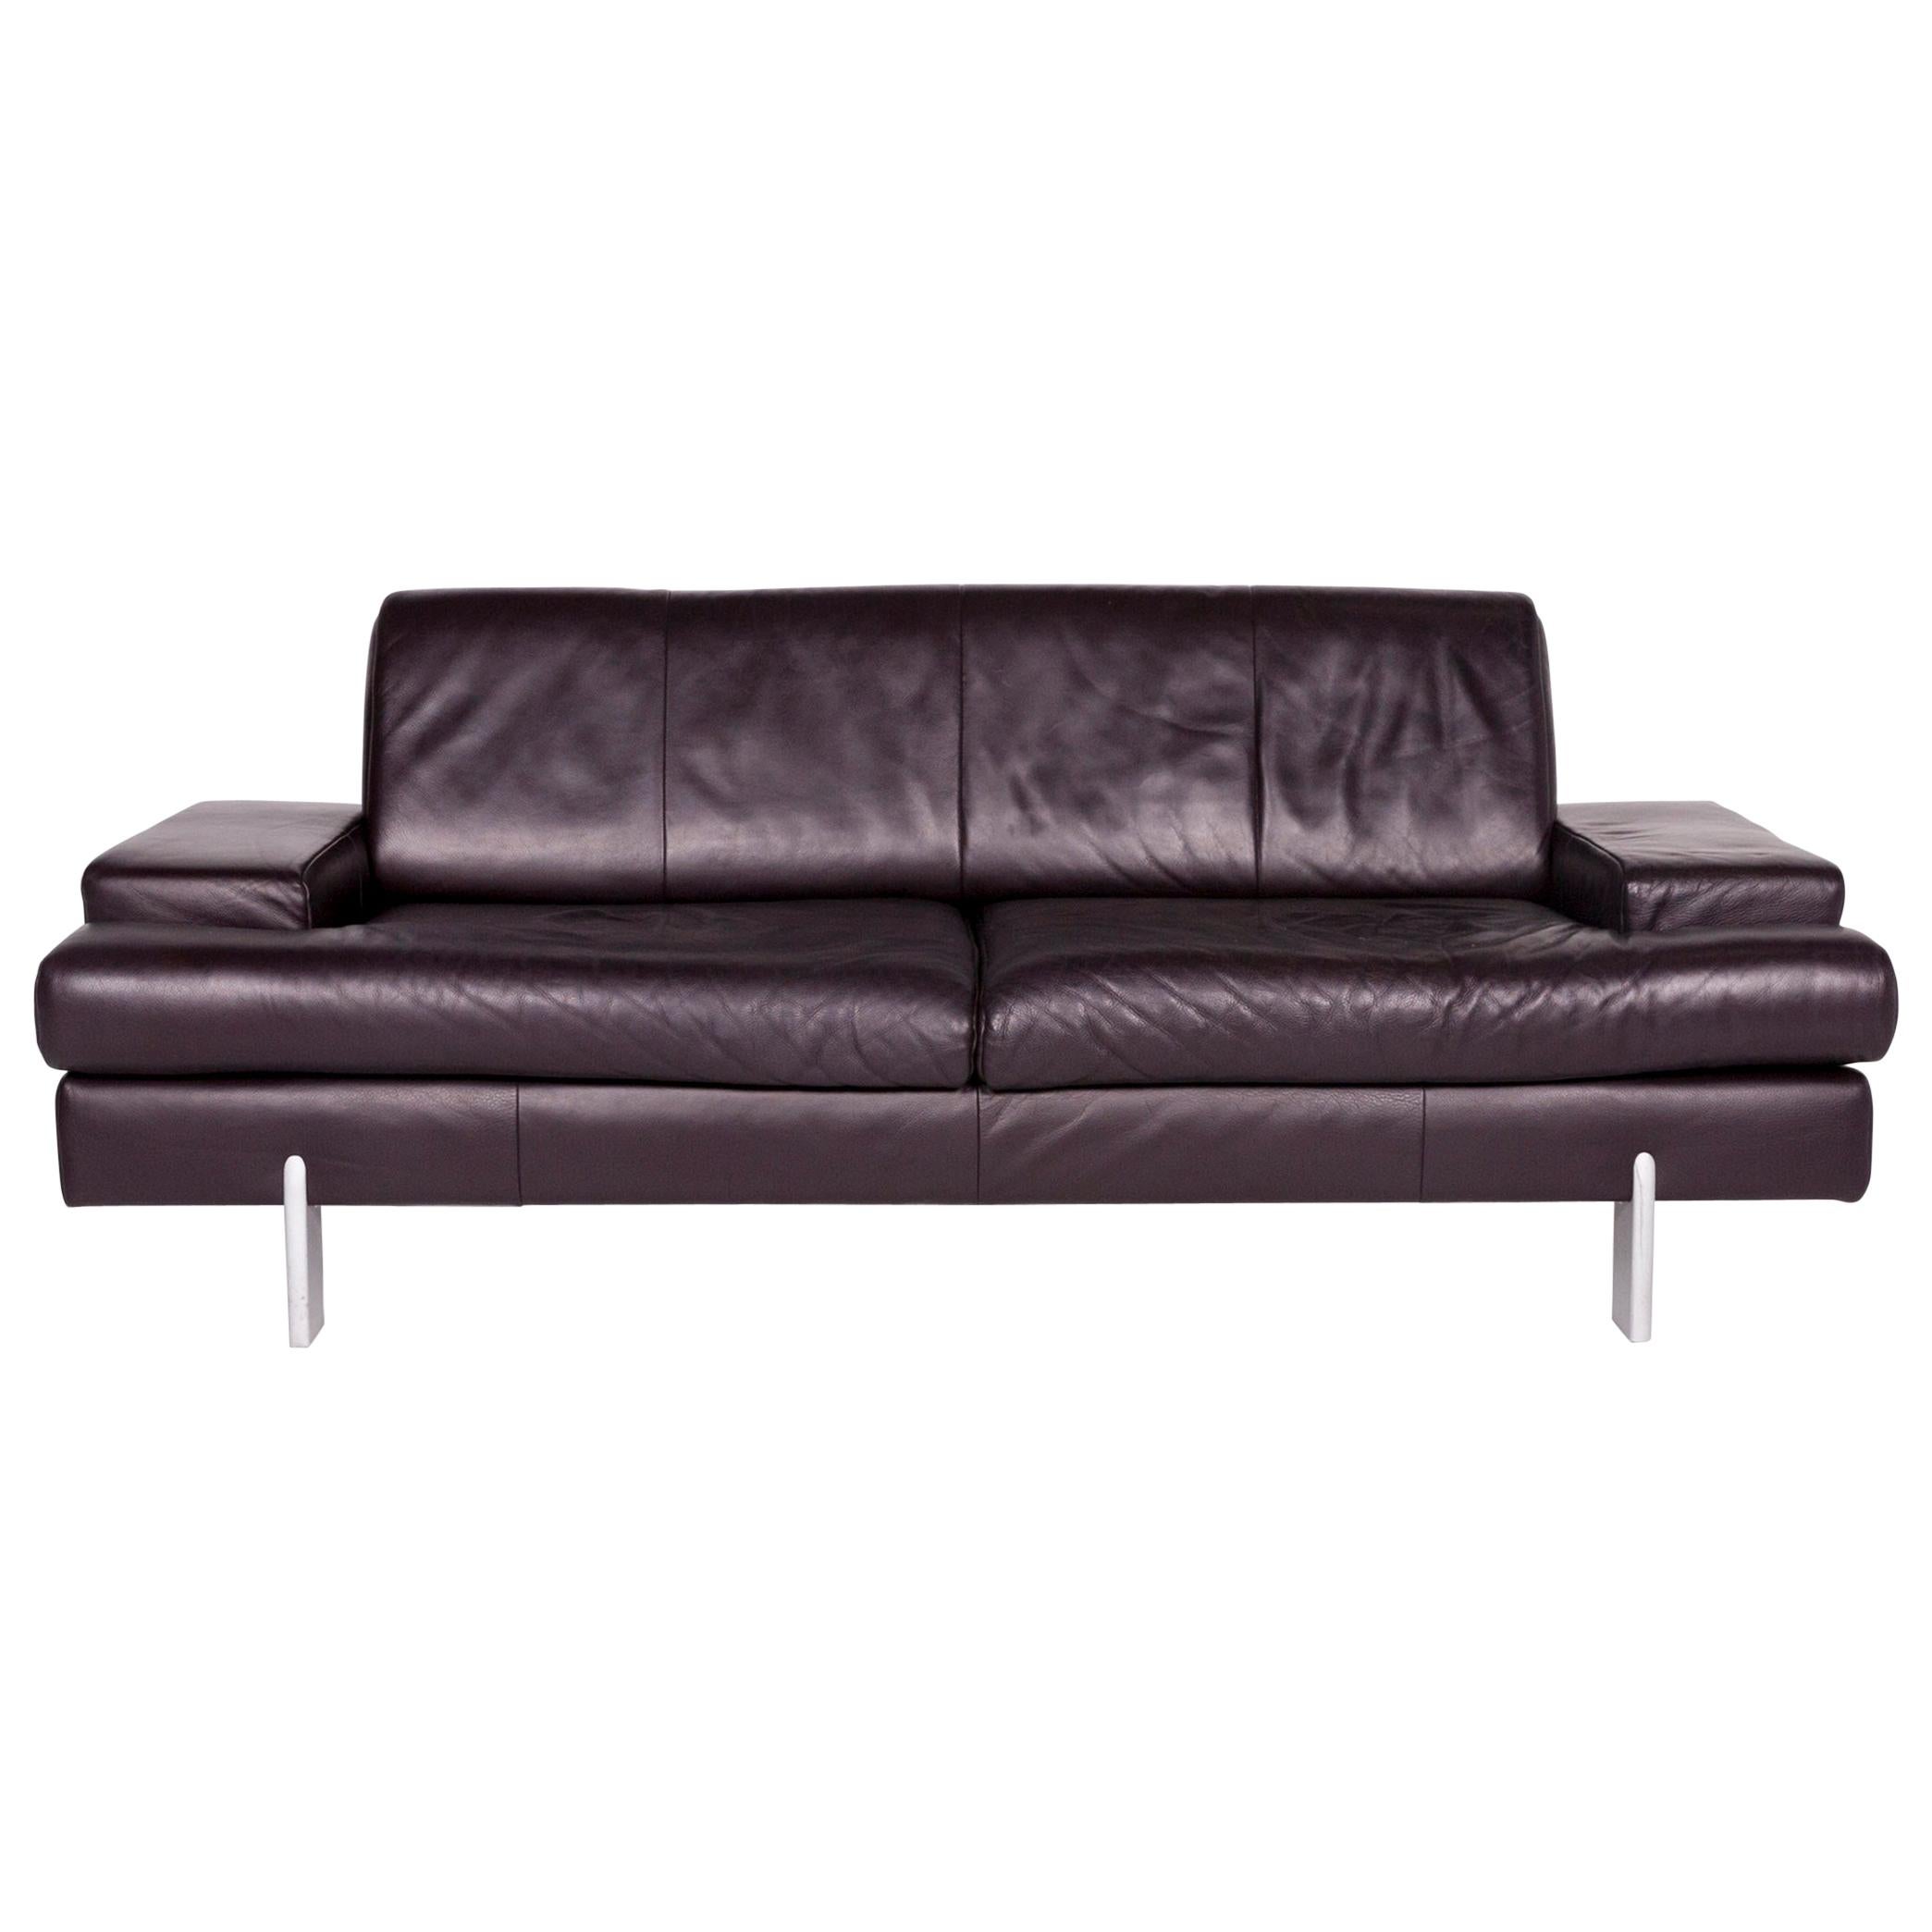 BMP Rolf Benz Leather Sofa Aubergine Three-Seat Couch For Sale